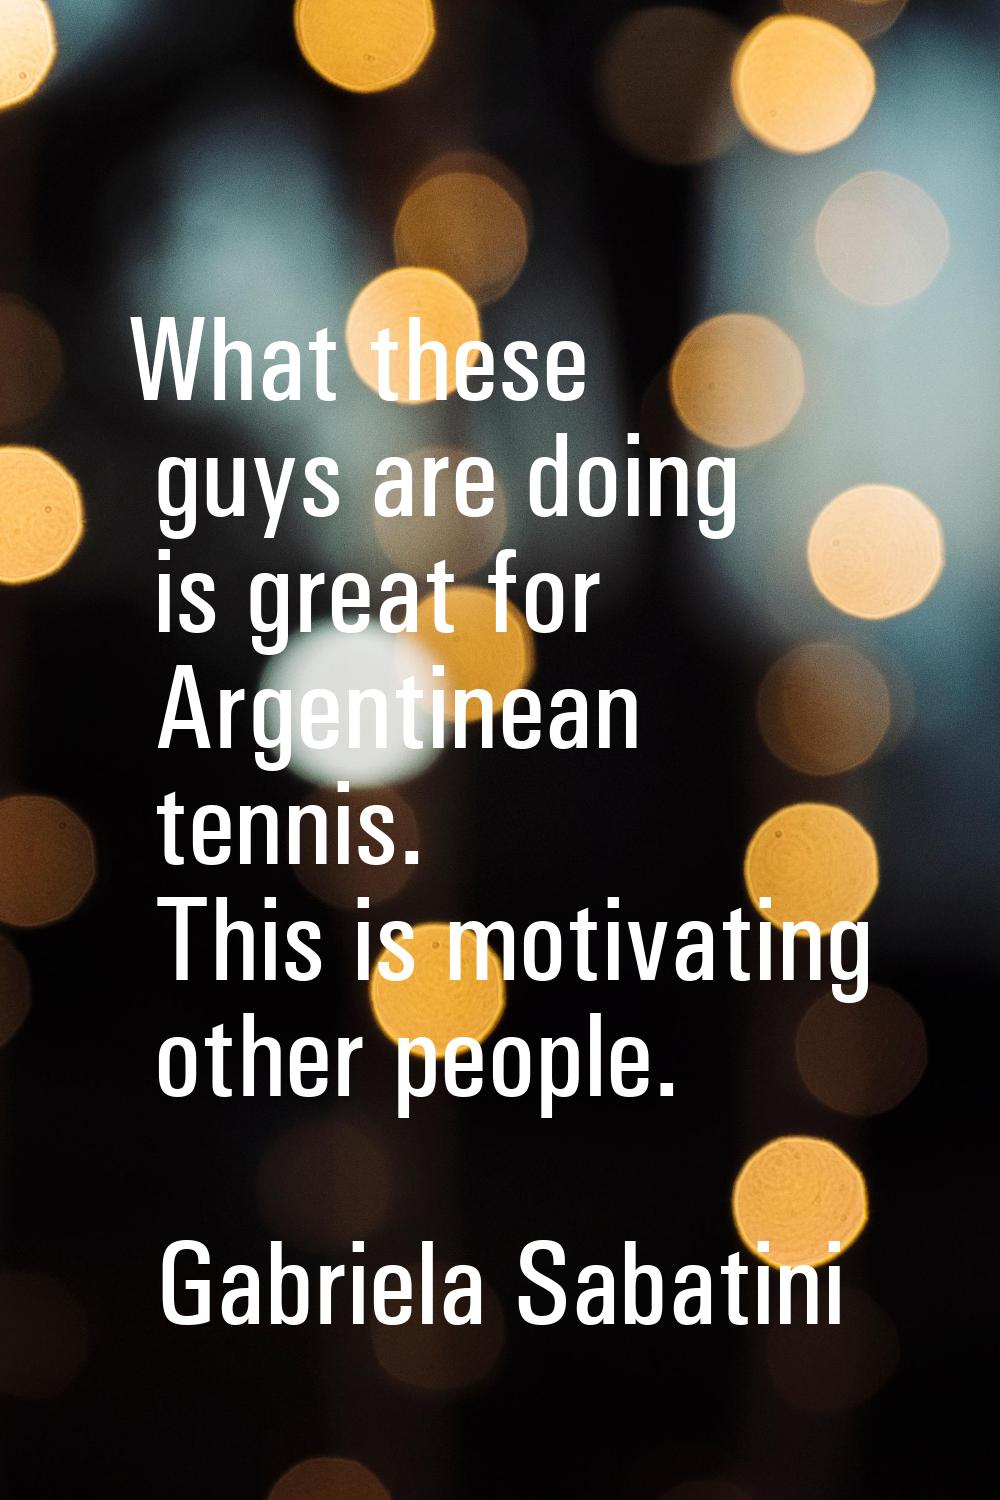 What these guys are doing is great for Argentinean tennis. This is motivating other people.